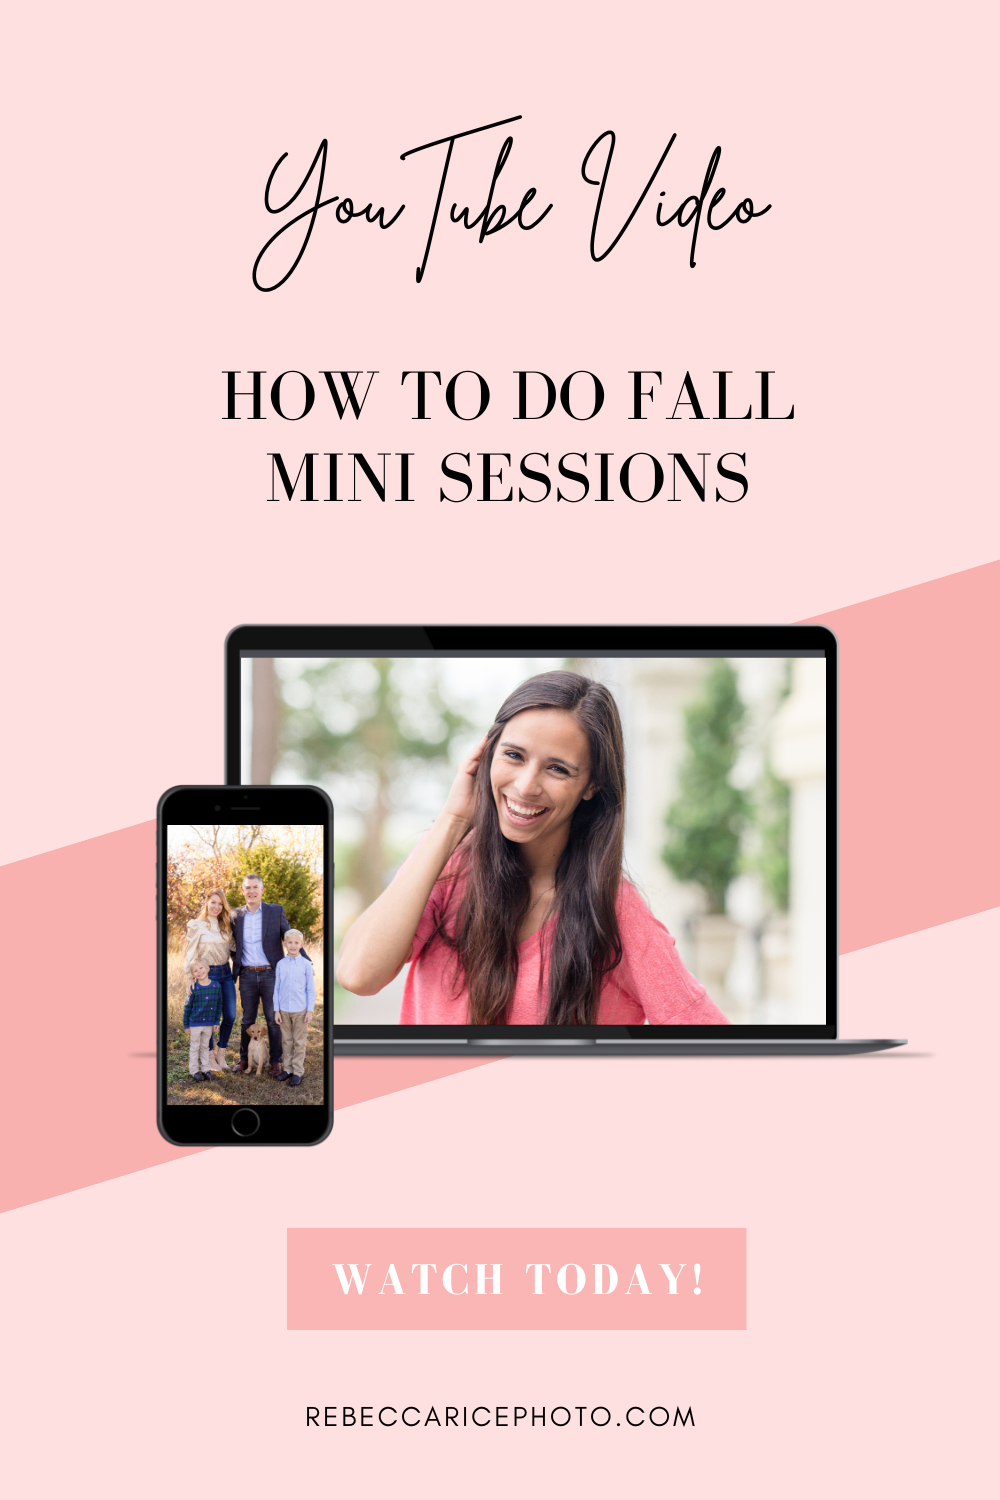 How to do fall Mini Sessions